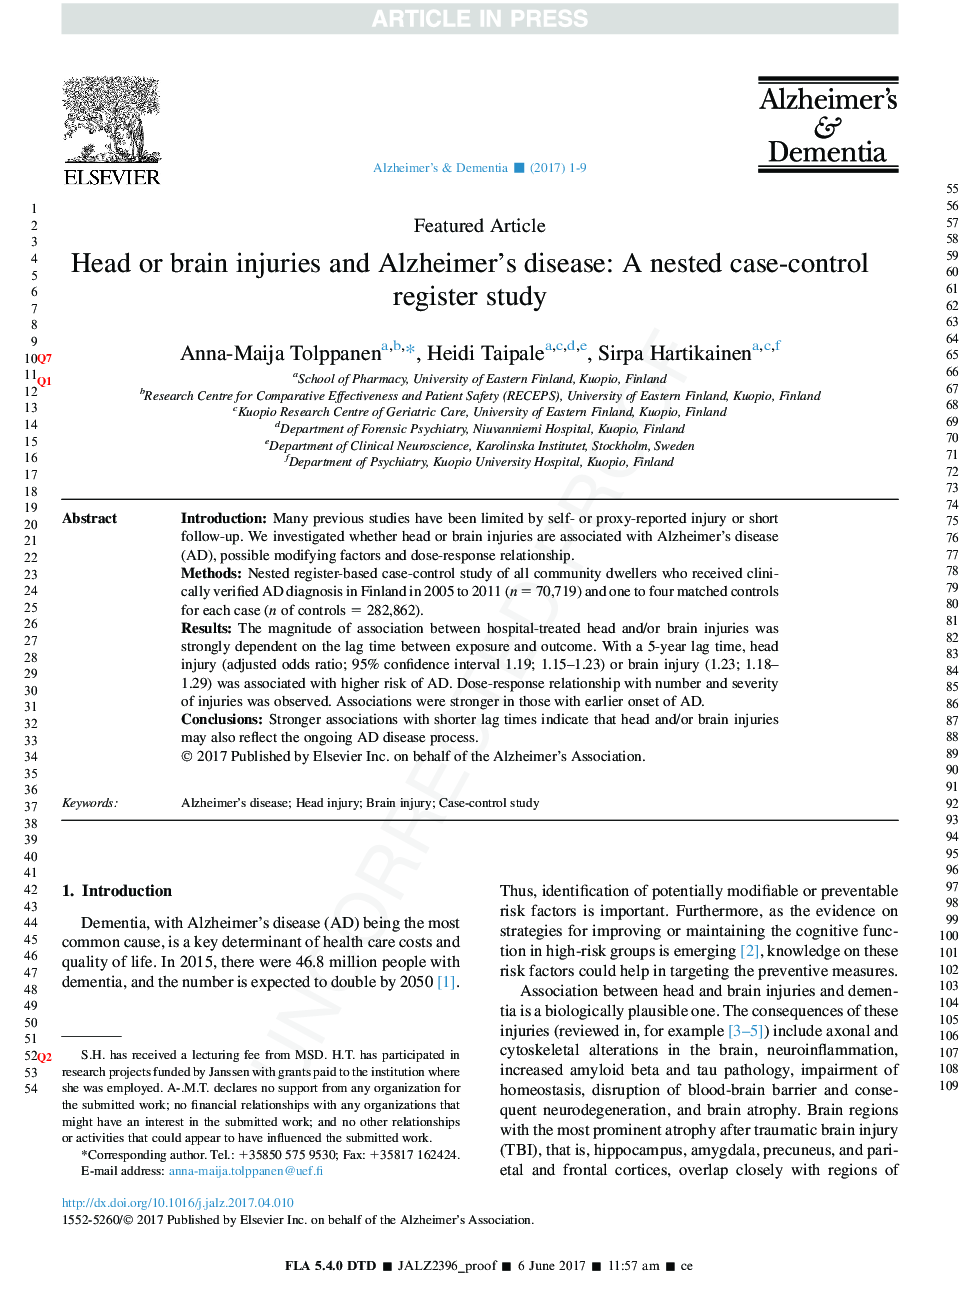 Head or brain injuries and Alzheimer's disease: A nested case-control register study